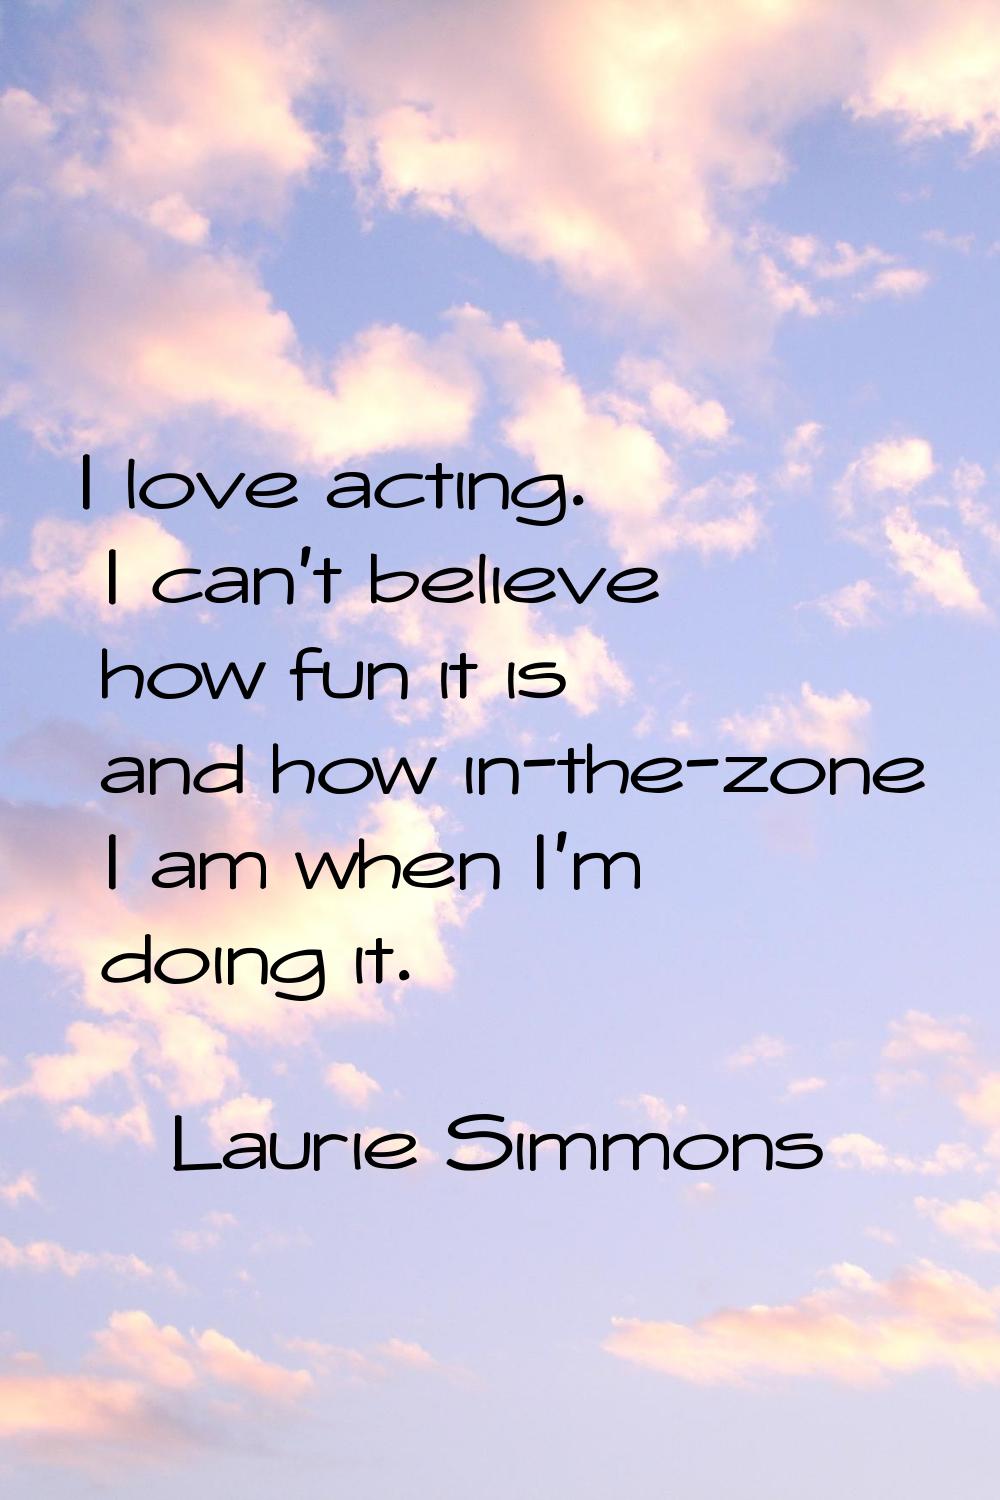 I love acting. I can't believe how fun it is and how in-the-zone I am when I'm doing it.